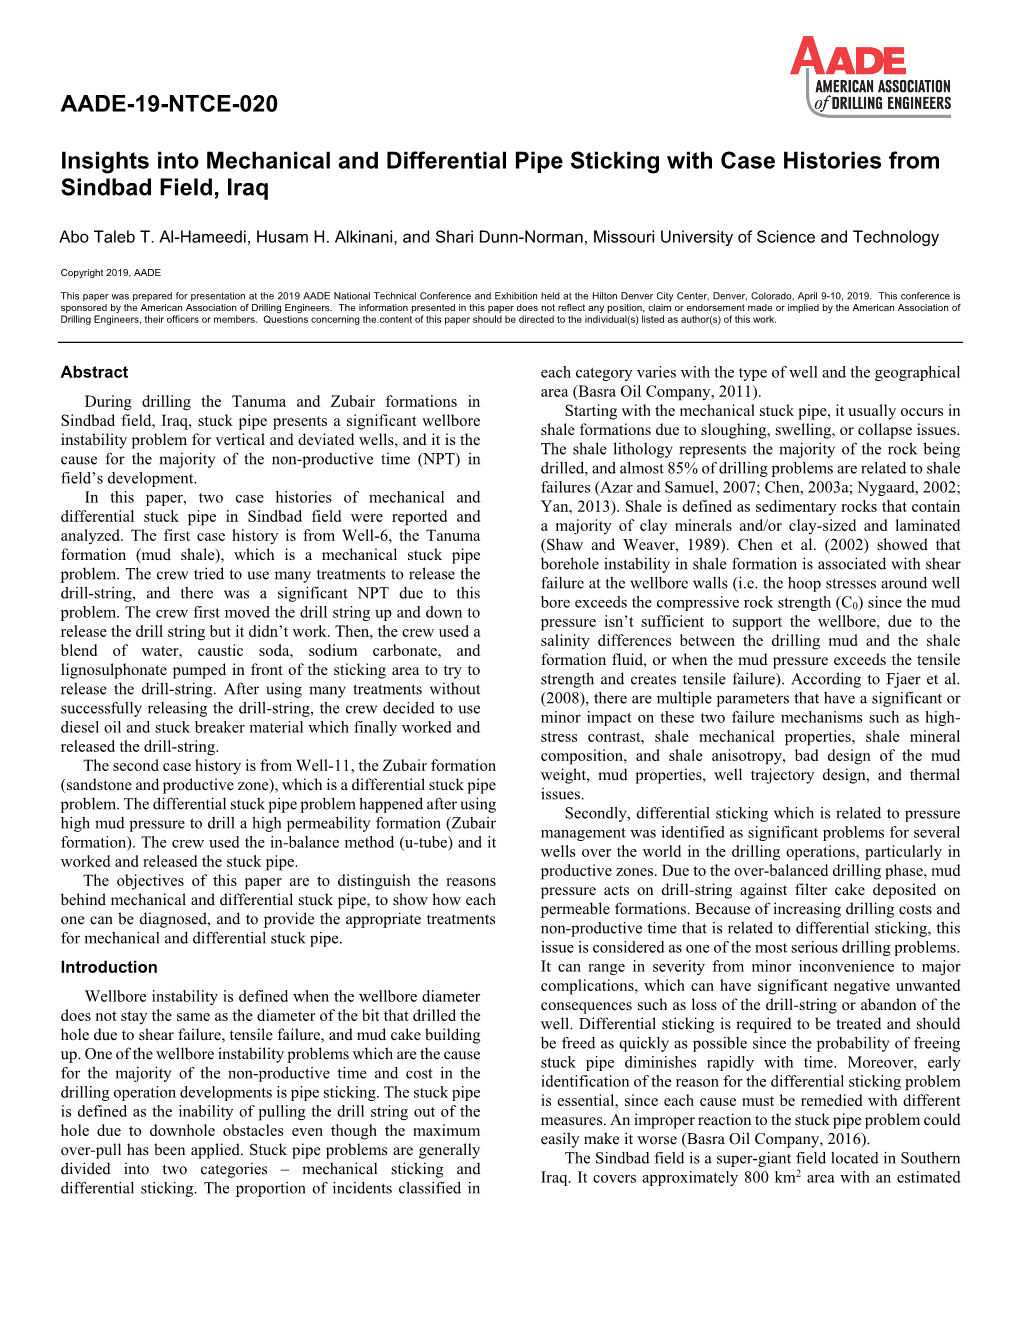 Insights Into Mechanical and Differential Pipe Sticking with Case Histories from Sindbad Field, Iraq